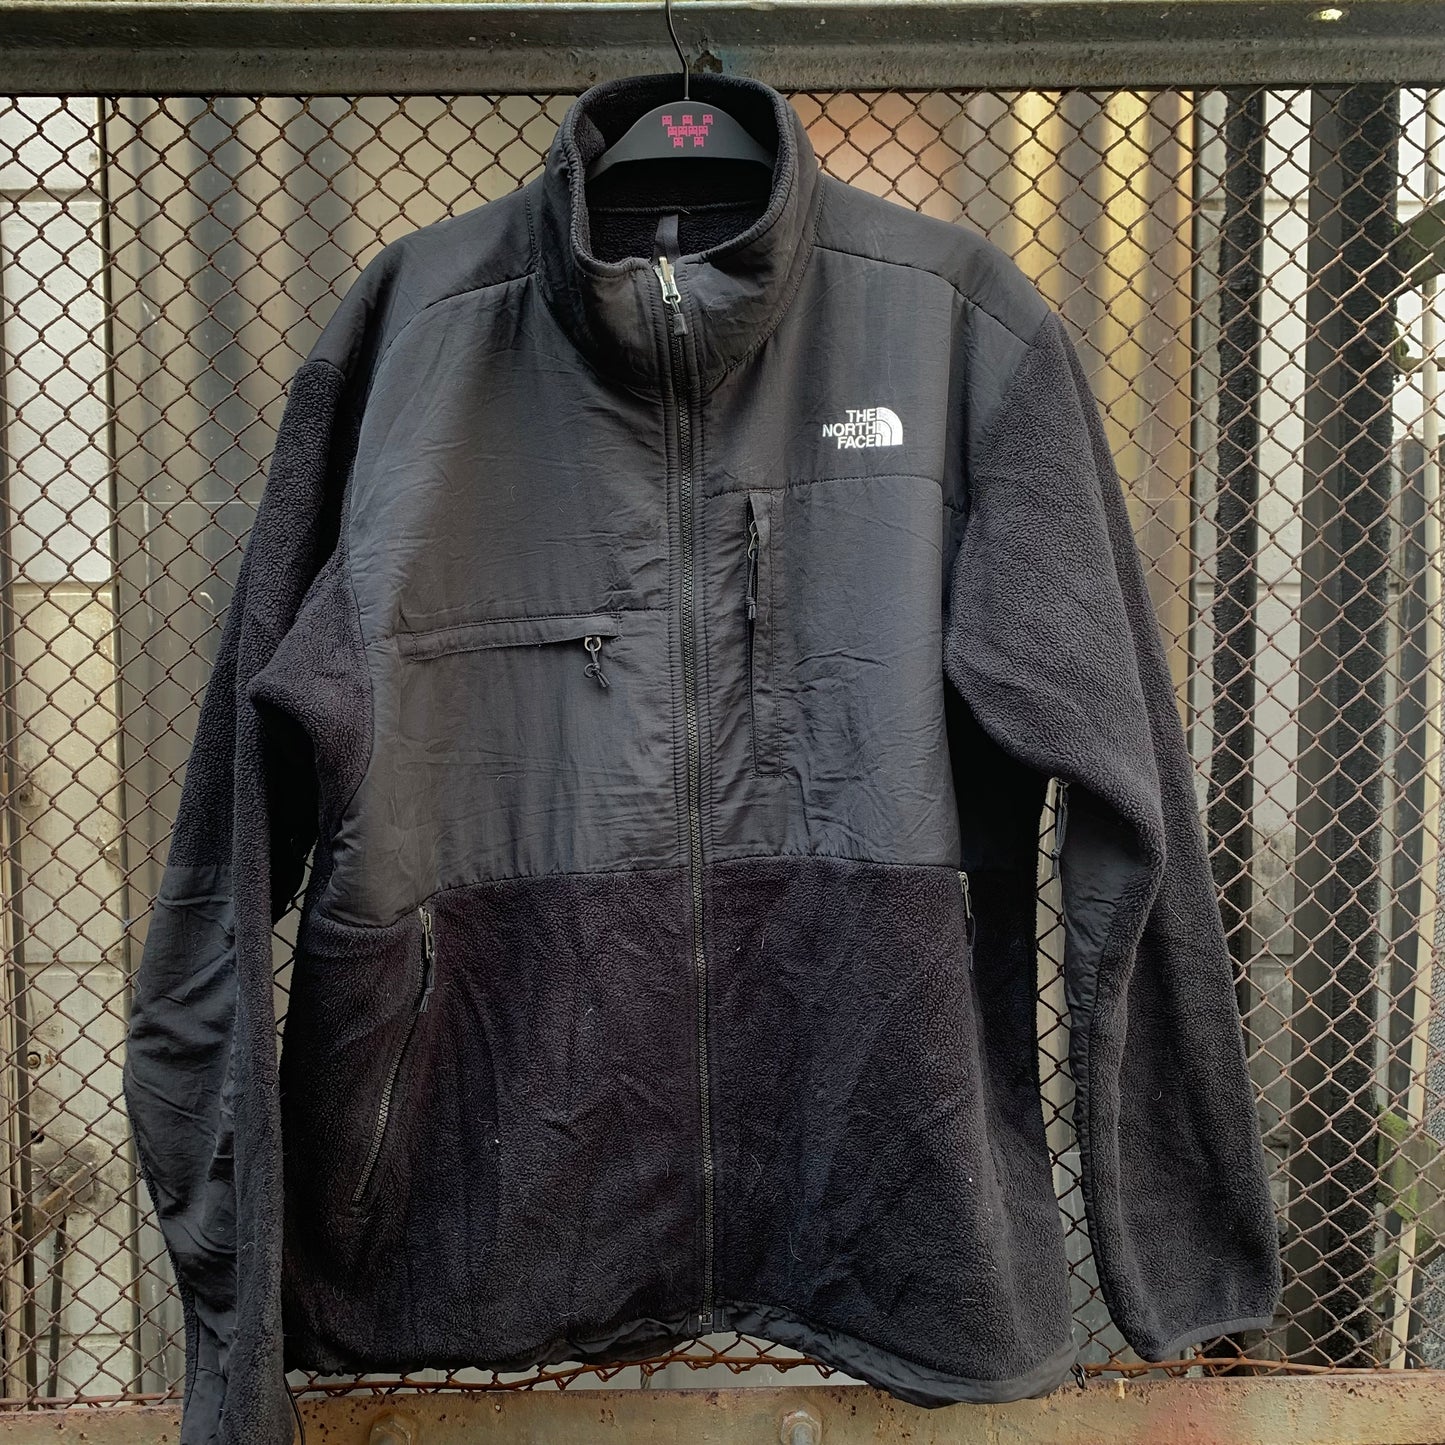 Padded Chest The North Face Black Fleece